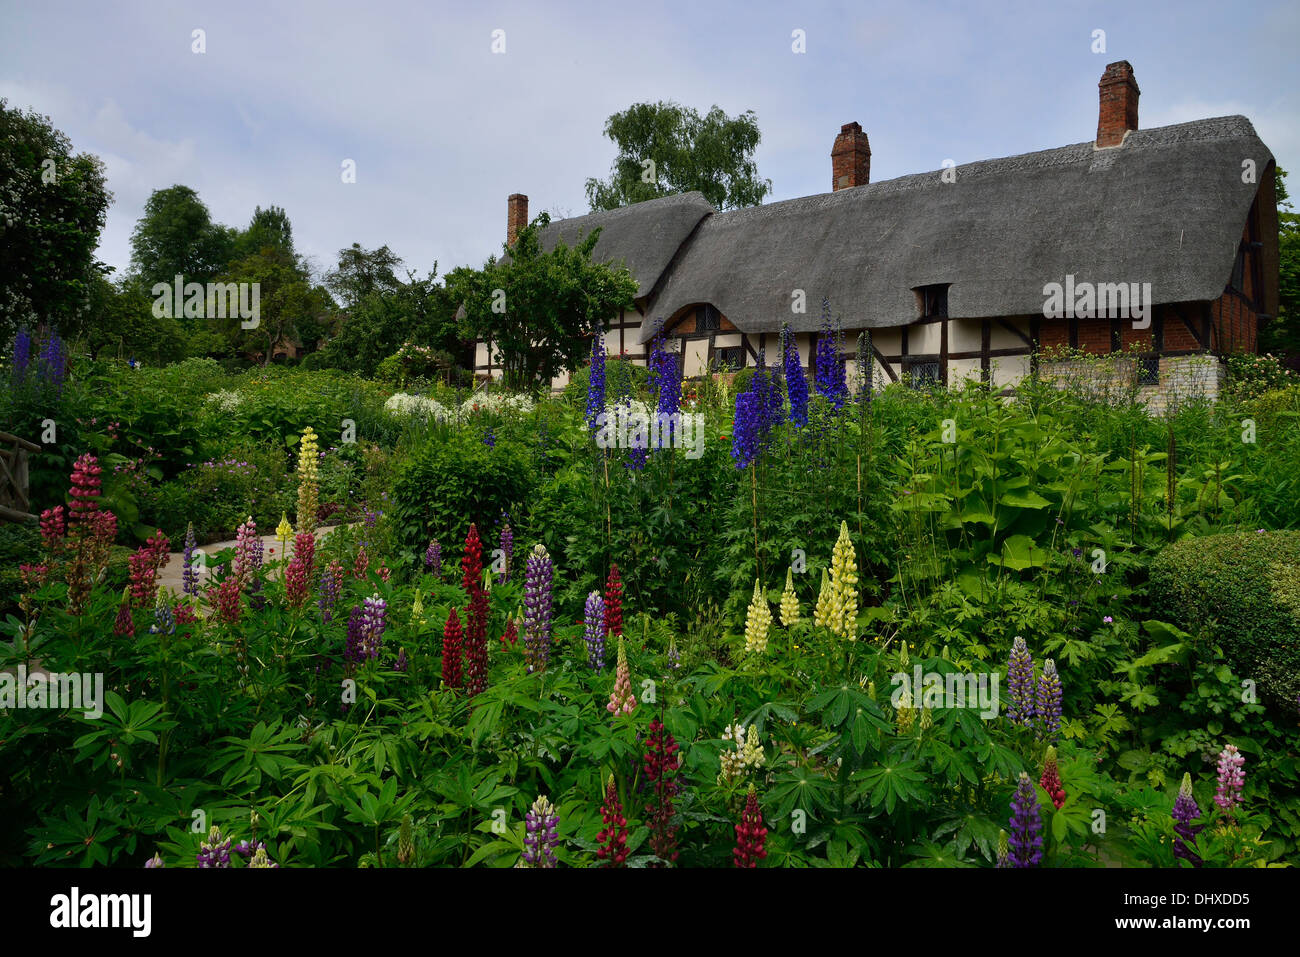 Anne Hathaway's Cottage Tudor (William Shakespeare's wife) Banque D'Images